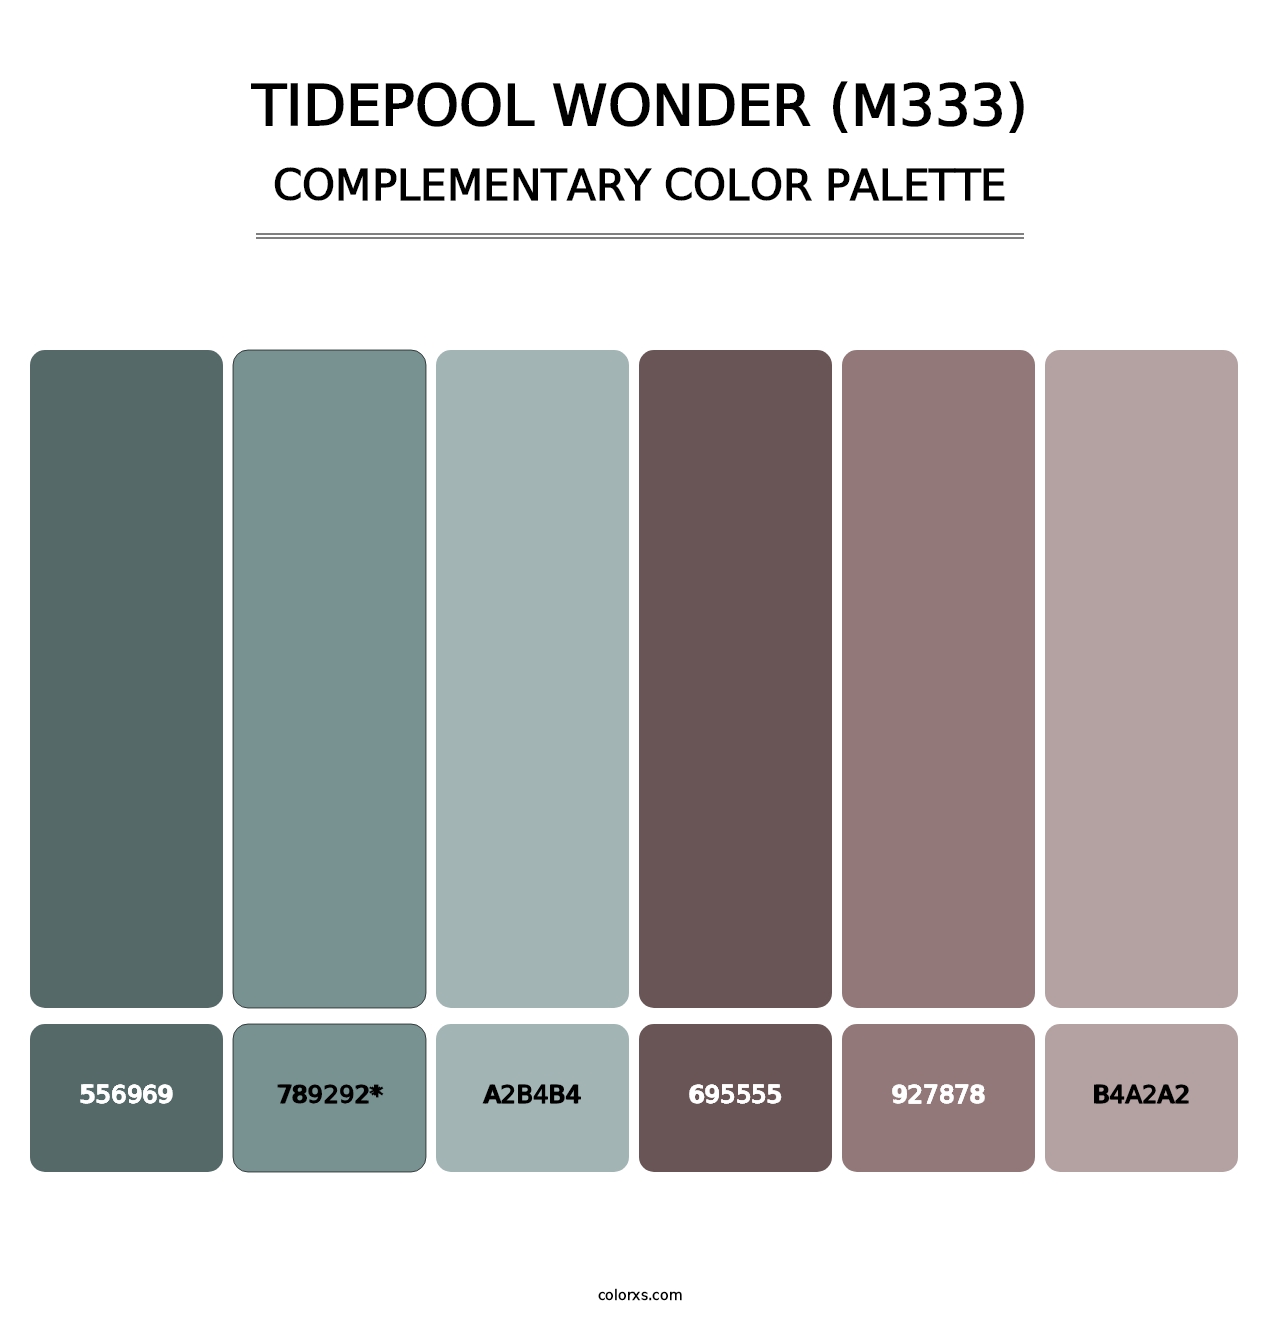 Tidepool Wonder (M333) - Complementary Color Palette